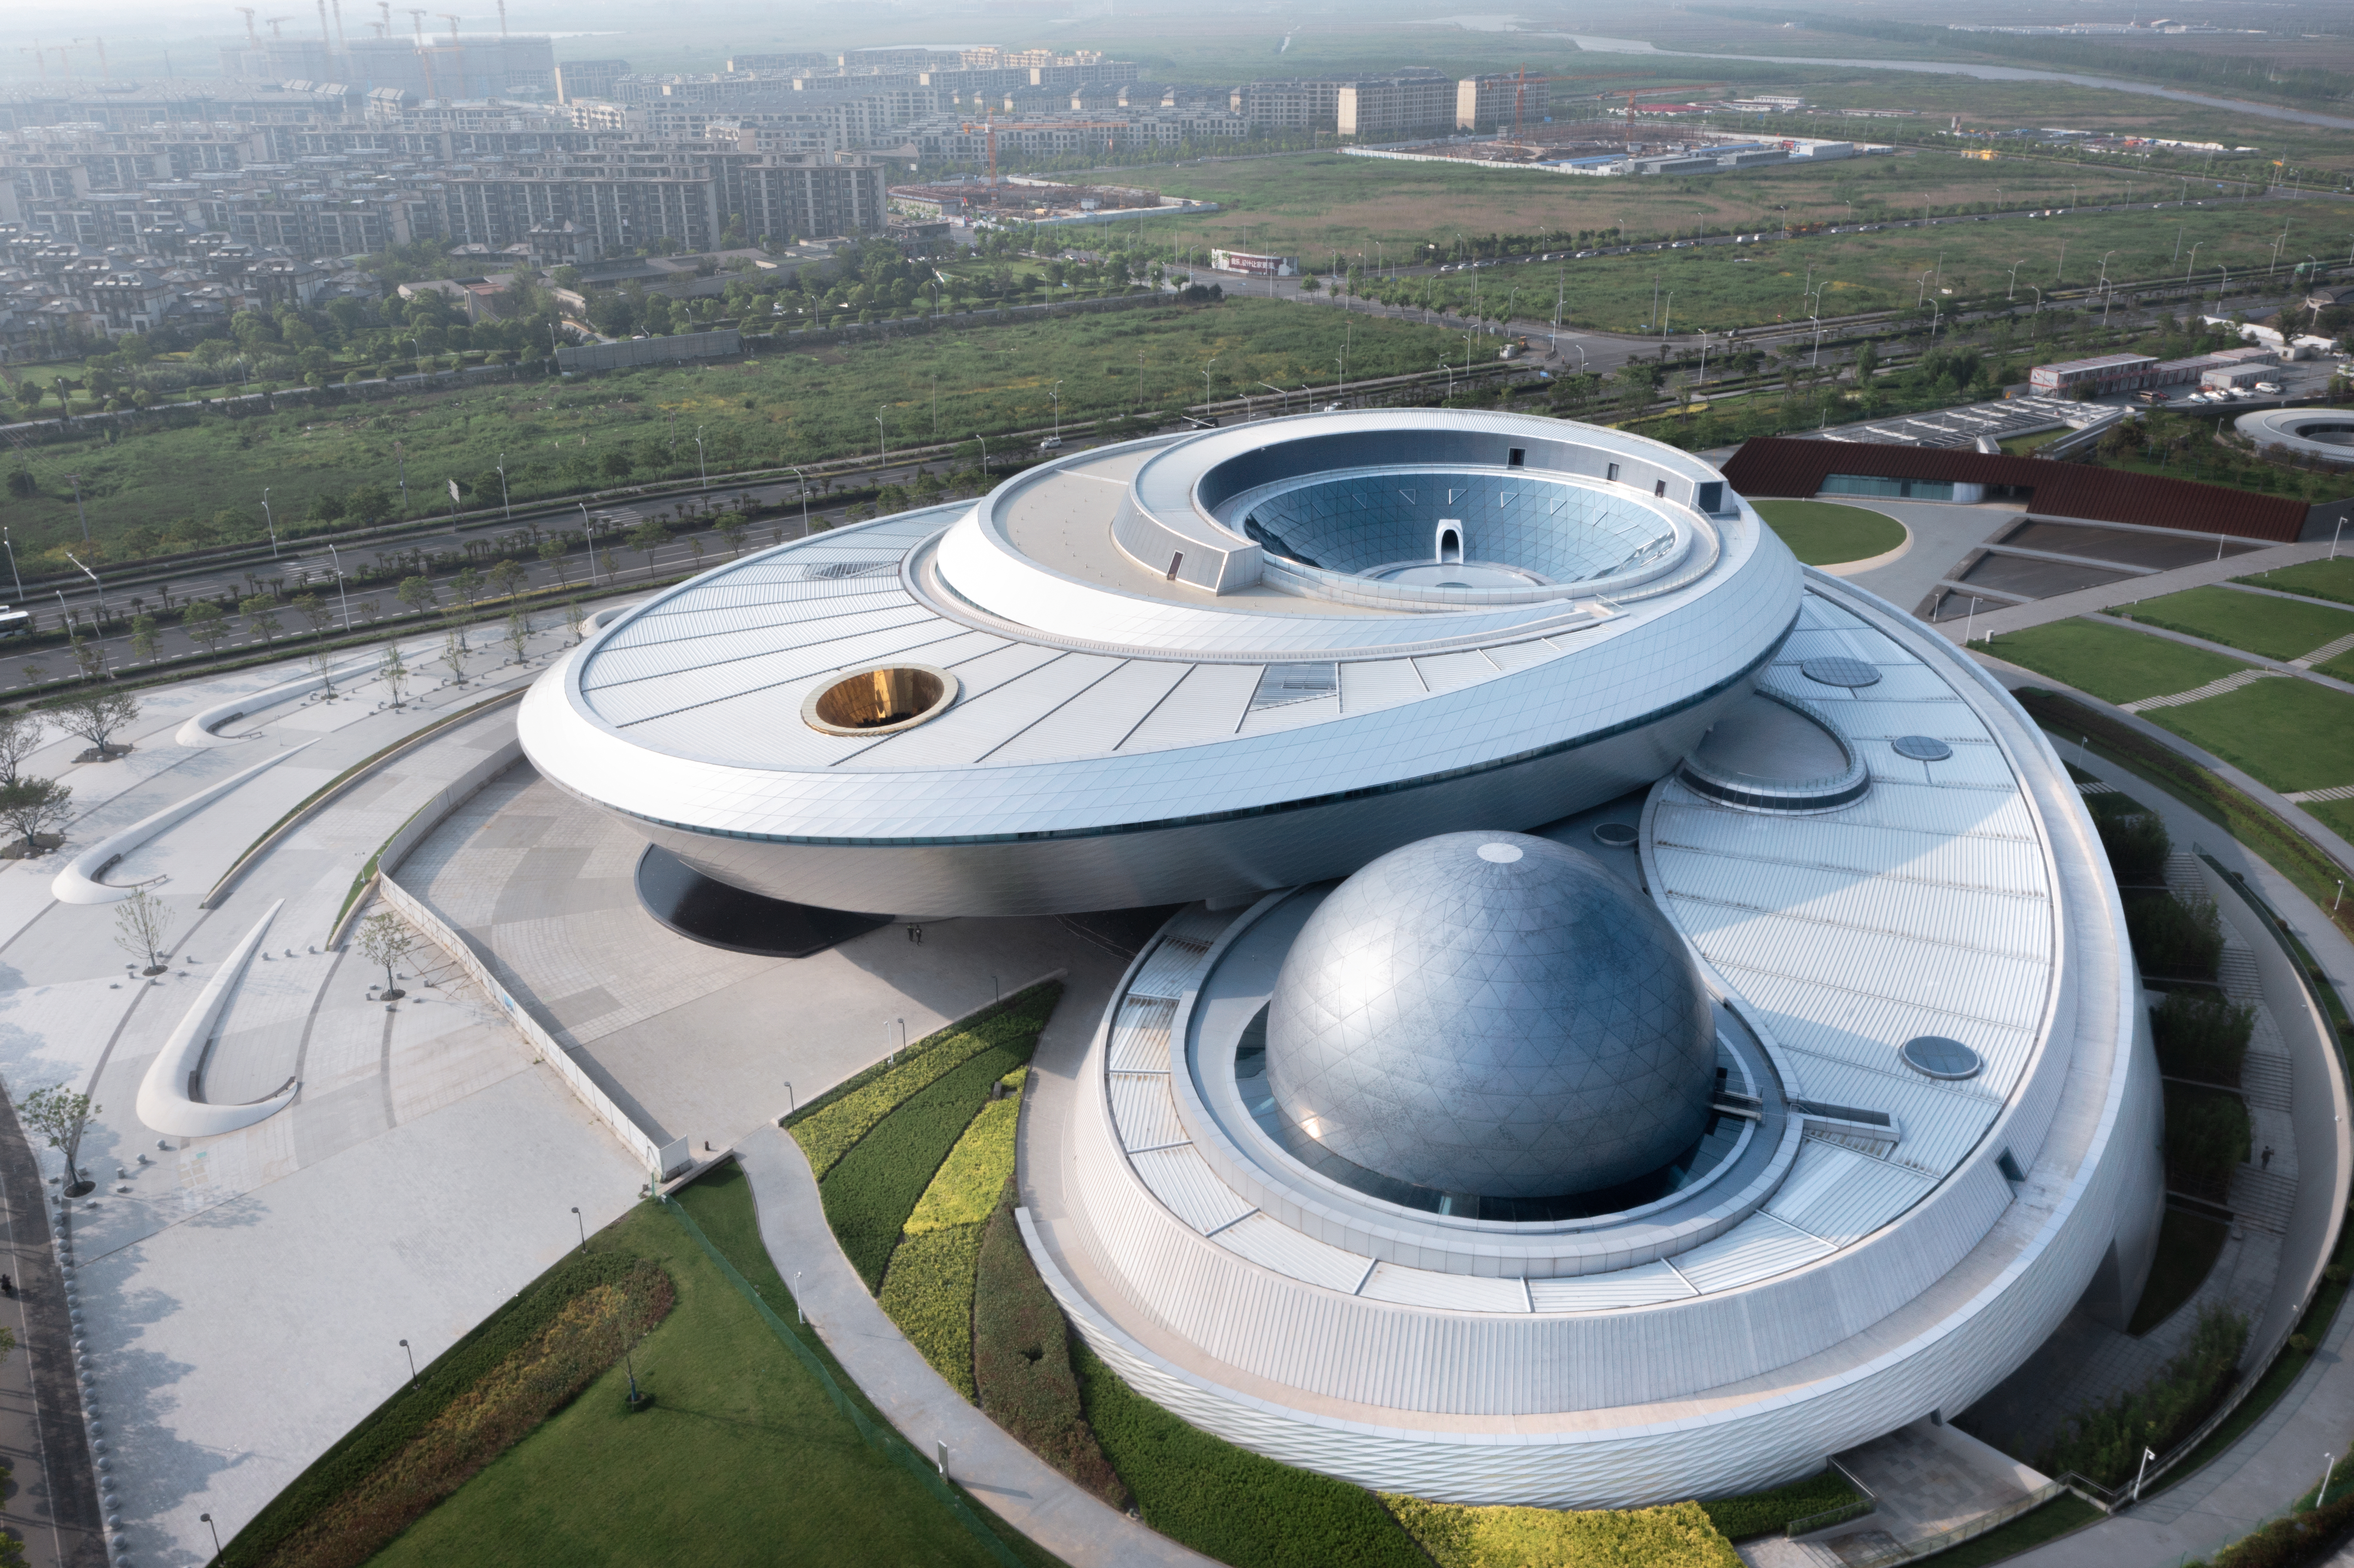 At 420,000 square feet, the astronomical branch of the Shanghai Science and Technology Museum is said to be the largest museum in the world solely dedicated to the study of astronomy.